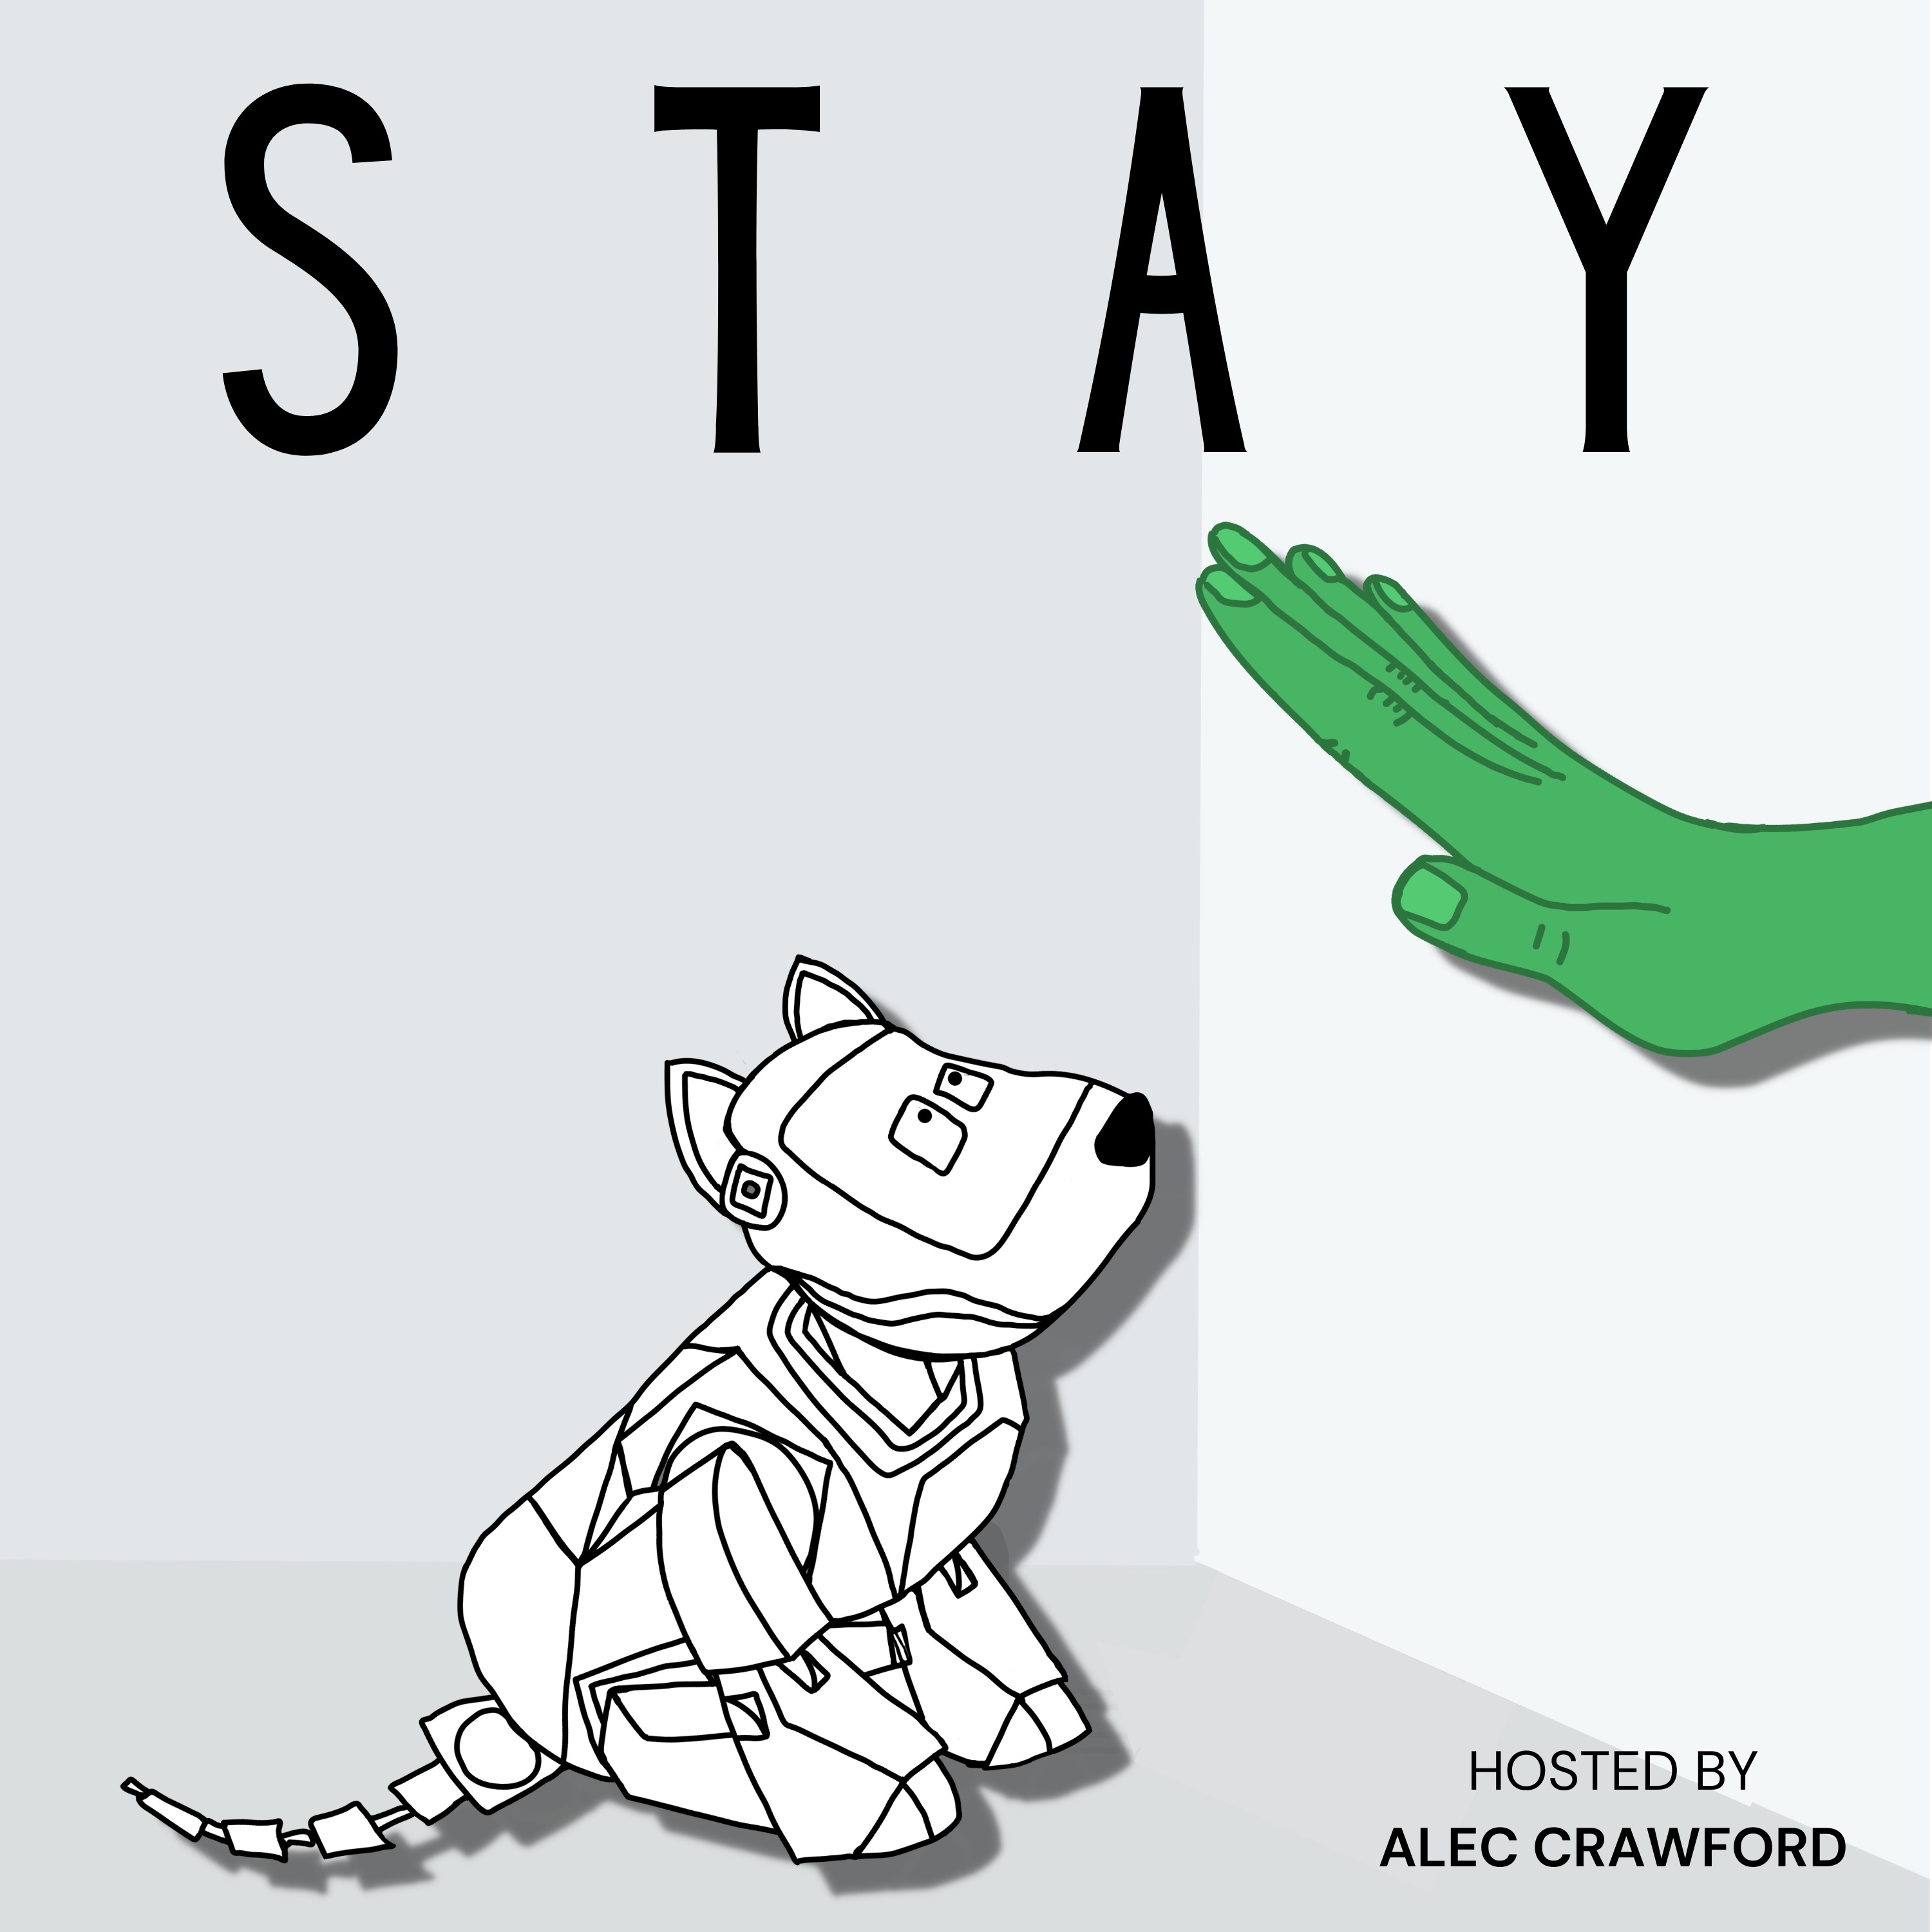 Artwork for STAY